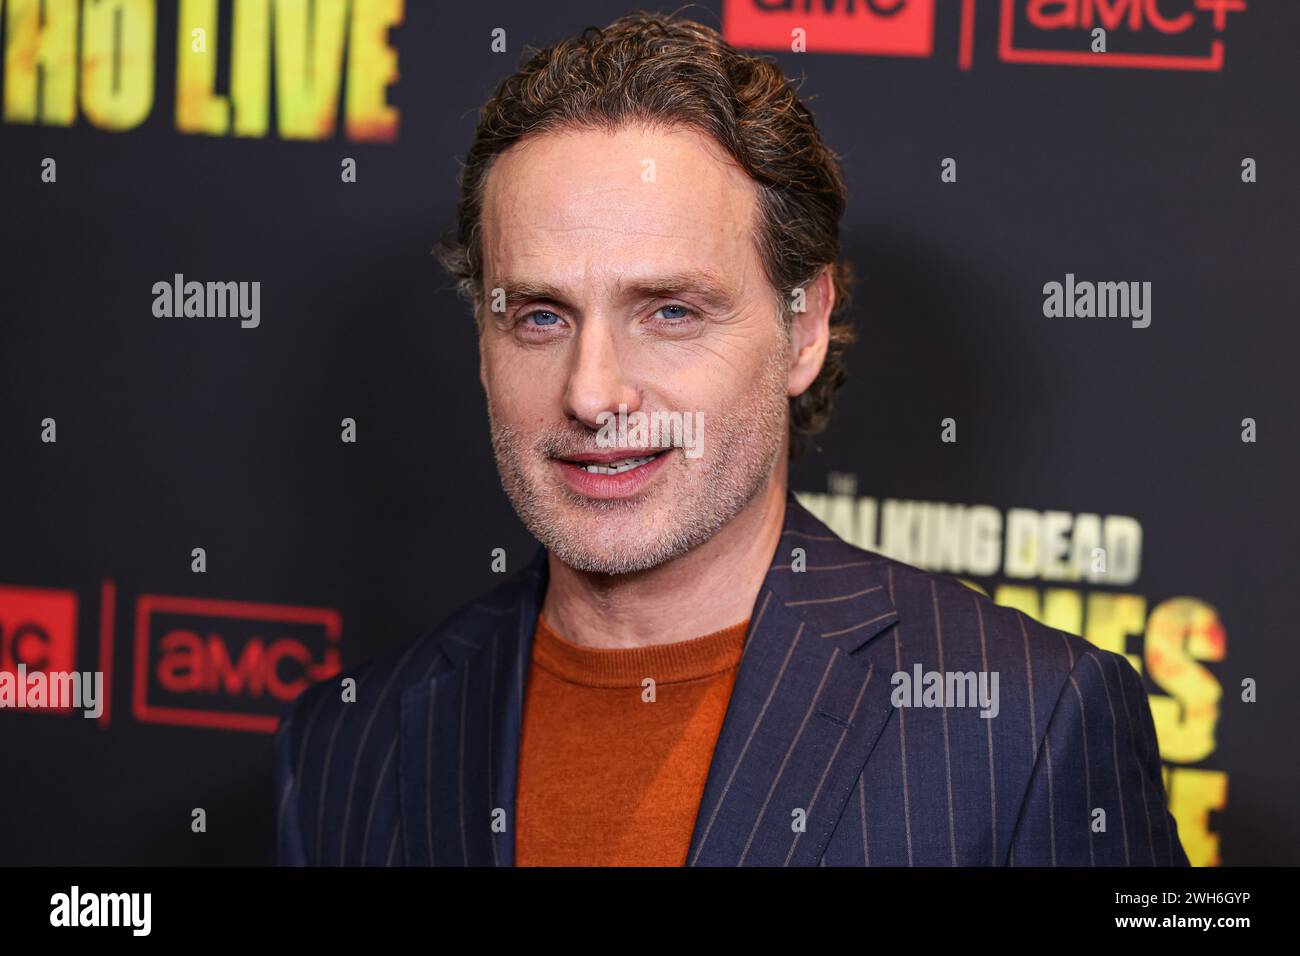 HOLLYWOOD, LOS ANGELES, KALIFORNIEN, USA - FEBRUAR 07: Andrew Lincoln kommt zur Los Angeles Premiere von AMC+'s The Walking Dead: the Ones Who Live' Staffel 1 fand am 7. Februar 2024 im Linwood Dunn Theater im Pickford Center for Motion Picture Study in Hollywood, Los Angeles, Kalifornien, USA statt. (Foto: Xavier Collin/Image Press Agency) Stockfoto